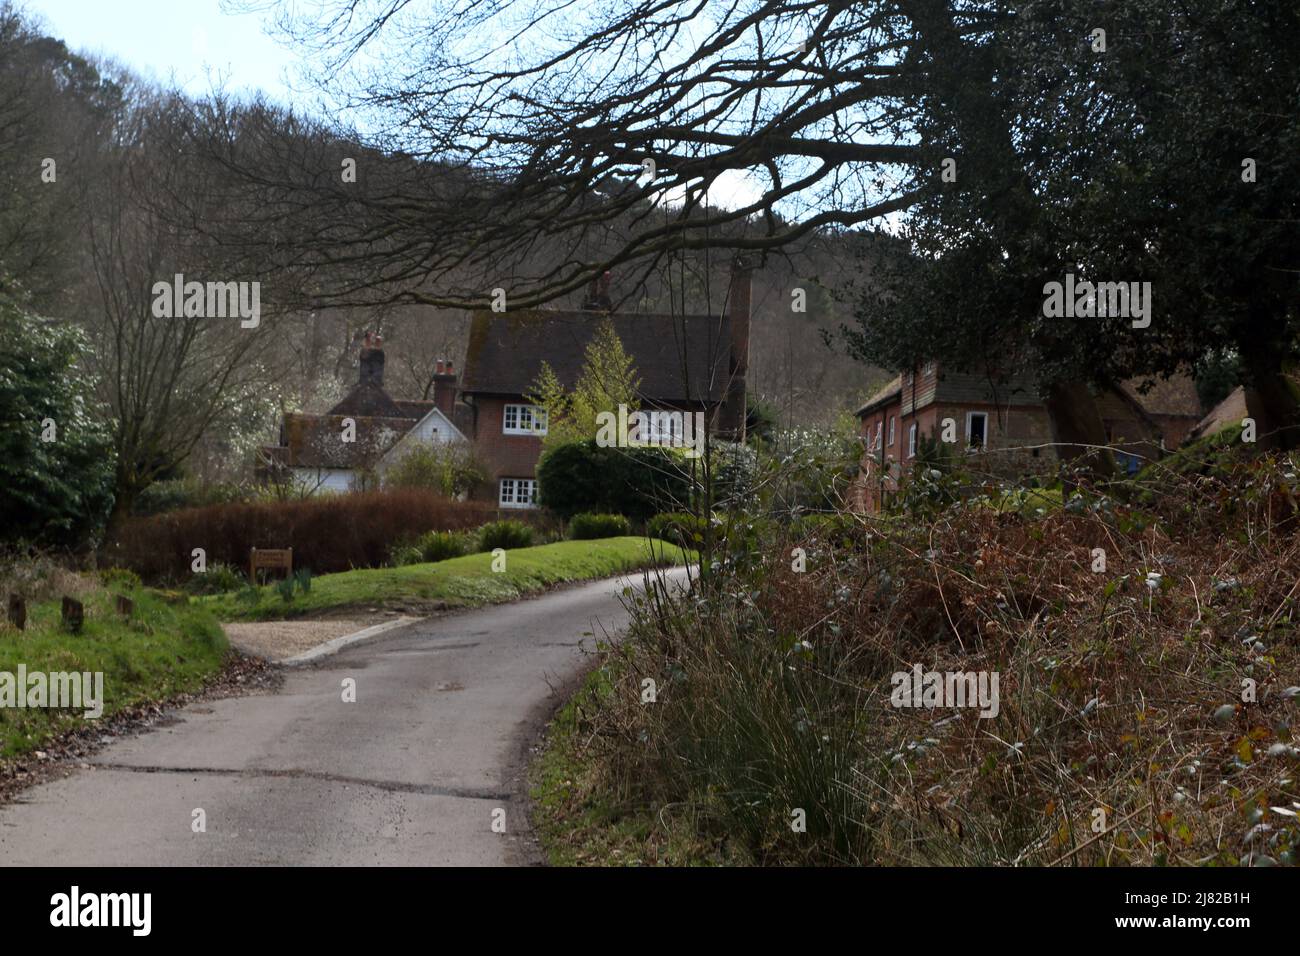 Friday Street Surrey England Road che conduce al Friday Cottage Foto Stock